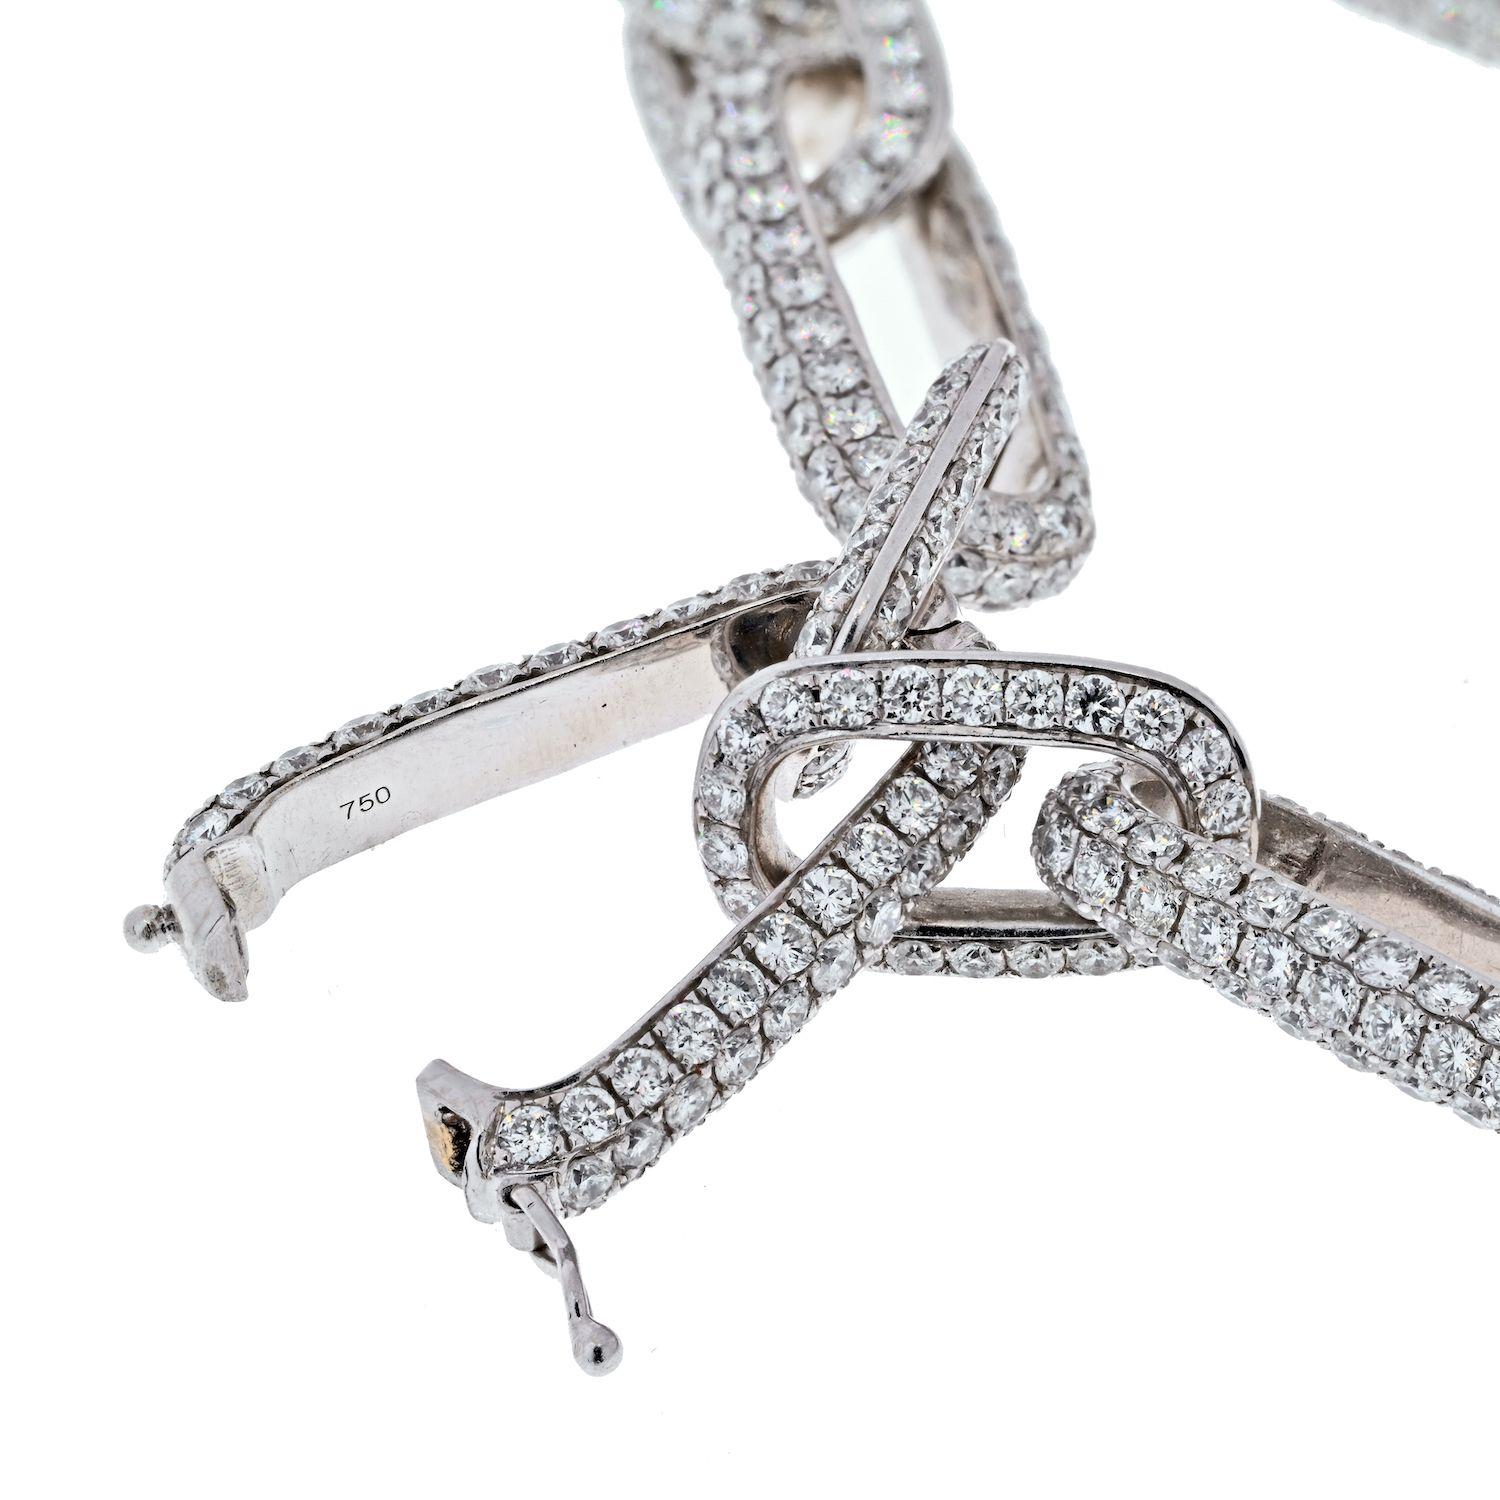 This fine link chain necklace features 41.37cttw of pave set round cut diamonds and is finished in 18 karat white gold. The necklace measures 18 inches in length and the pave links go all the way around. This could be worn every day and would be a